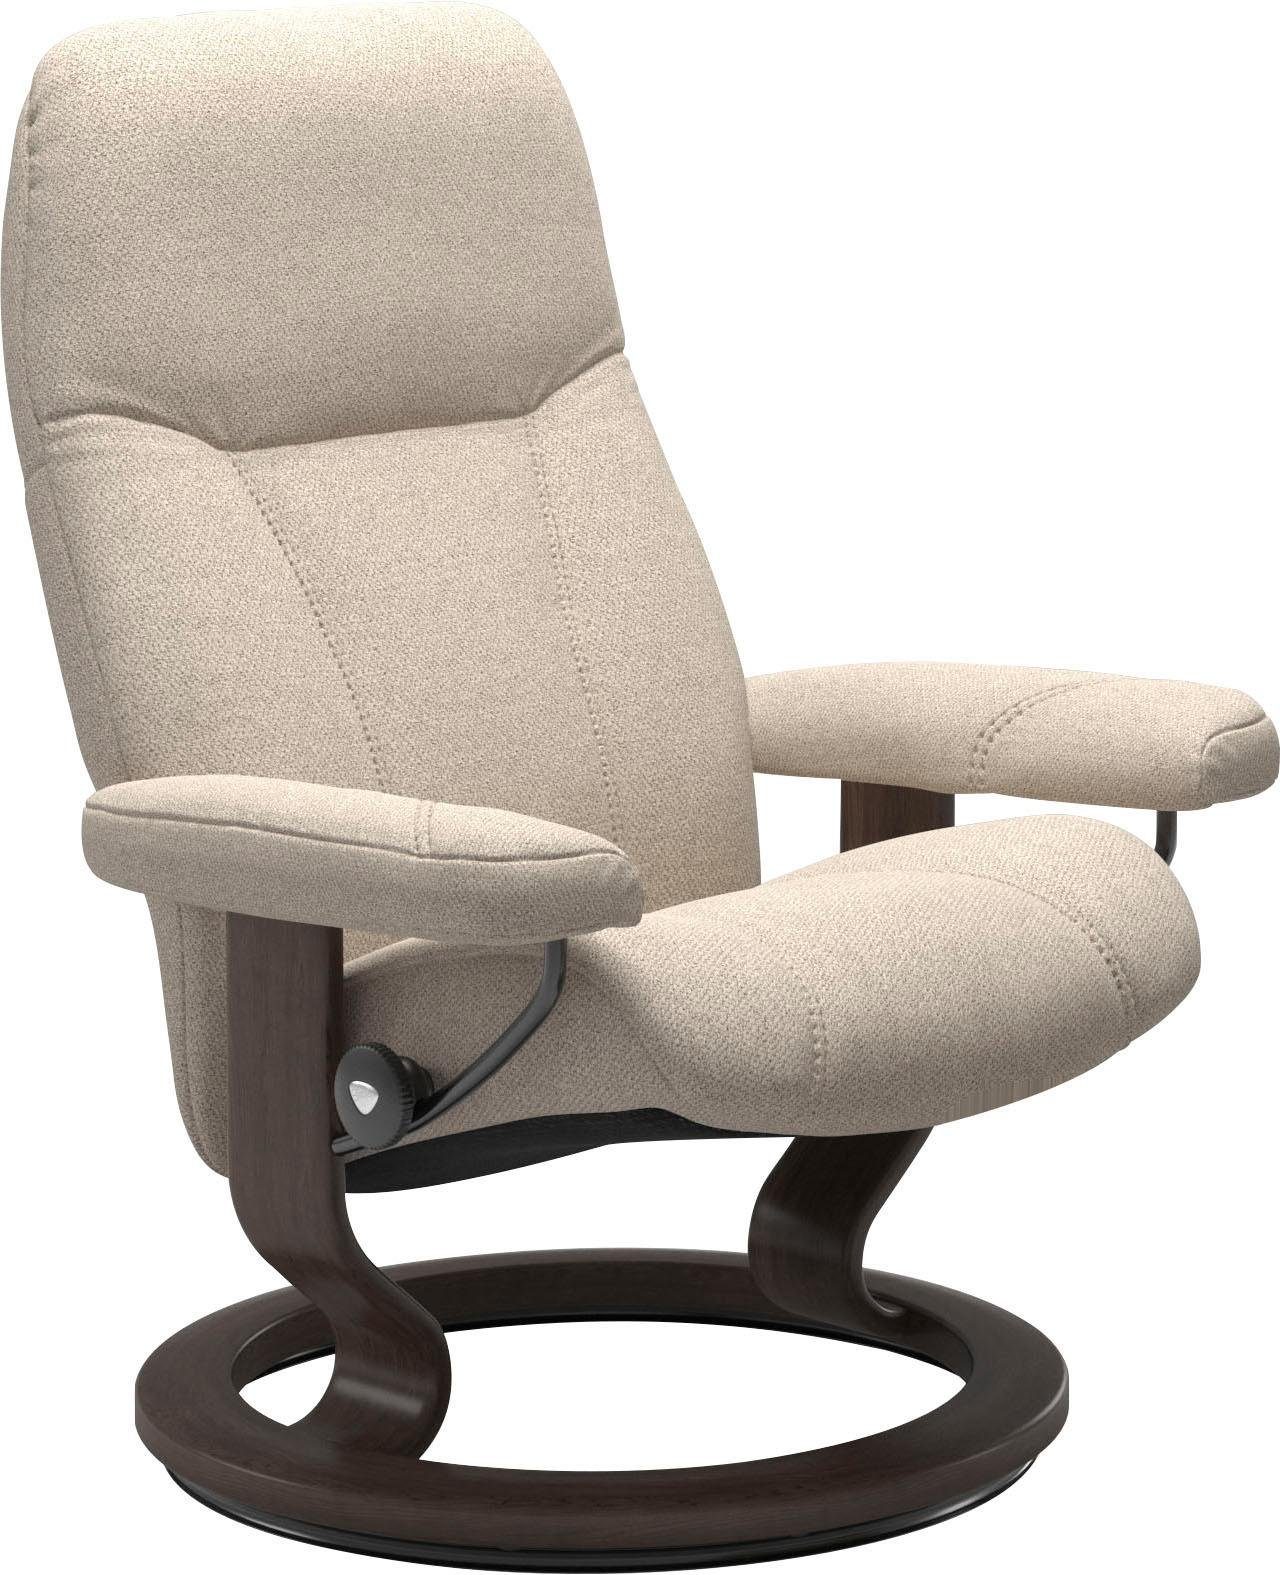 Relaxsessel Größe Classic Consul, S, mit Base, Wenge Gestell Stressless®